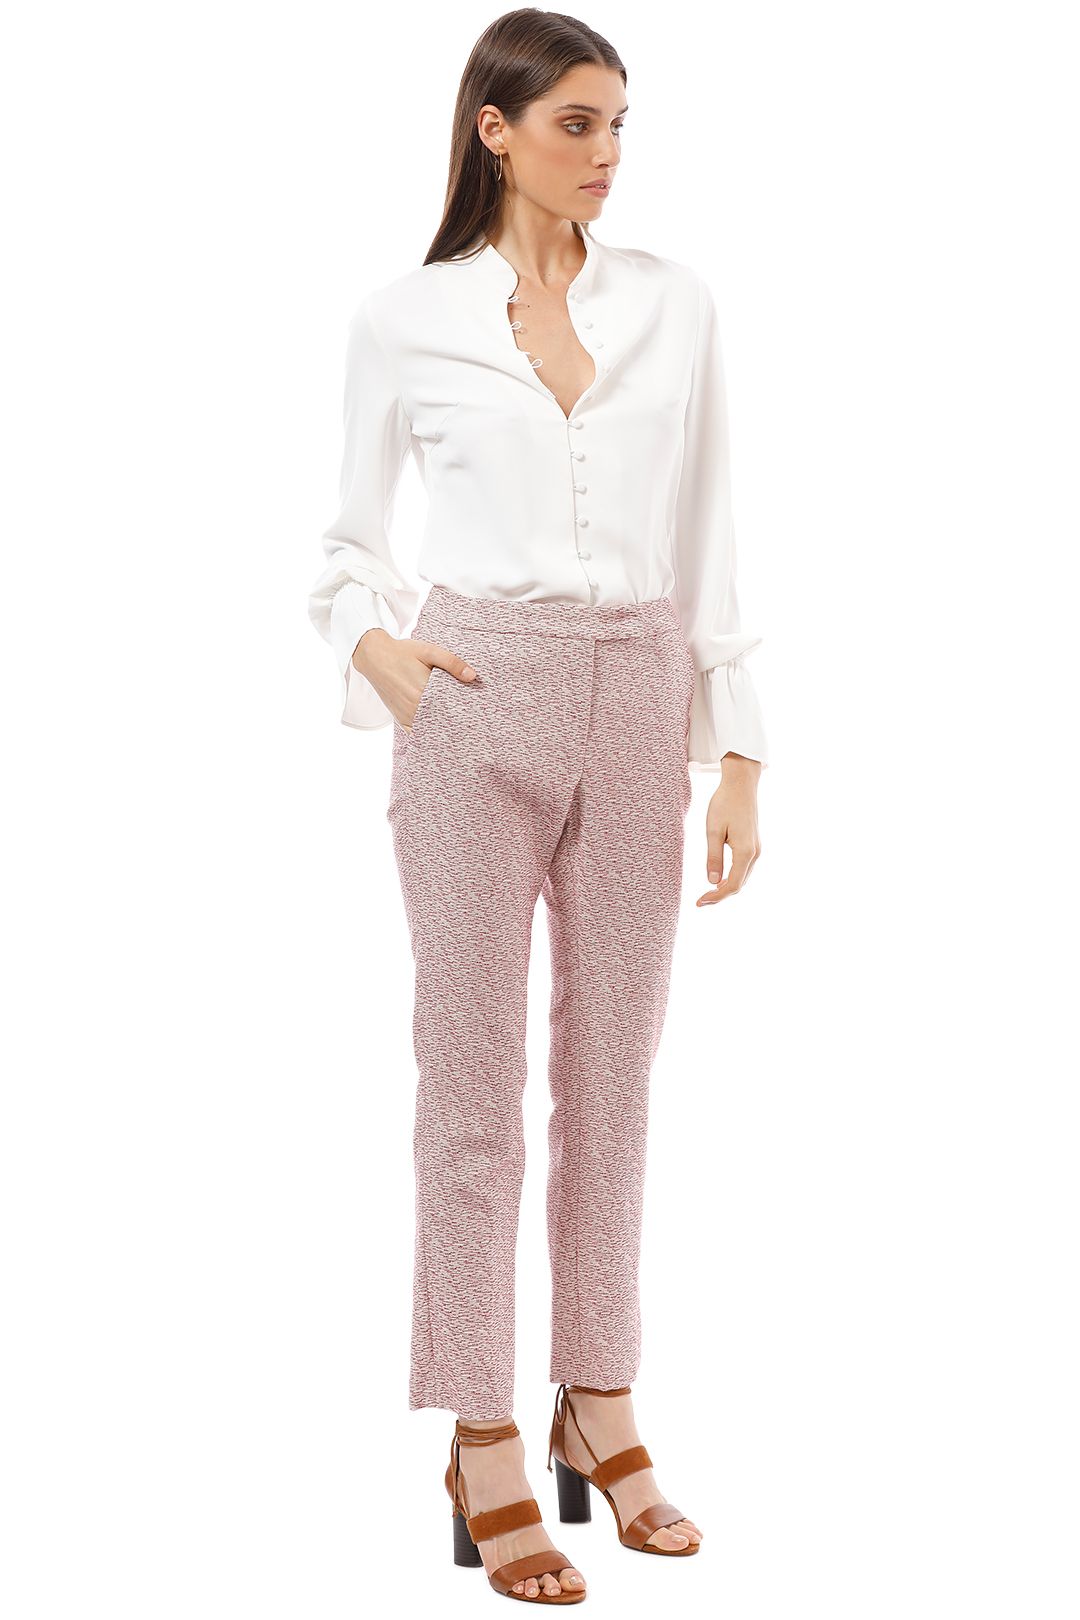 Max and Co - Carezza Pants - Pink - SIde